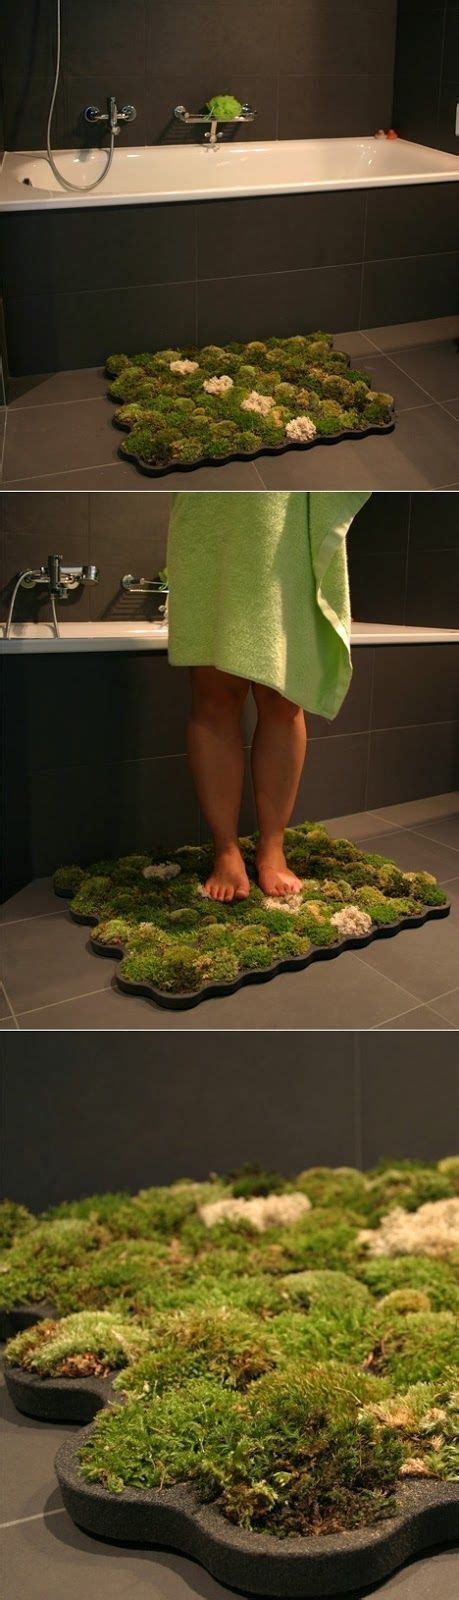 Lay out beautiful artwork and trending patterns from independent artists show your feet some love with a rug. Moss Bathroom Mat | Green bathroom rugs, Moss bath mats ...